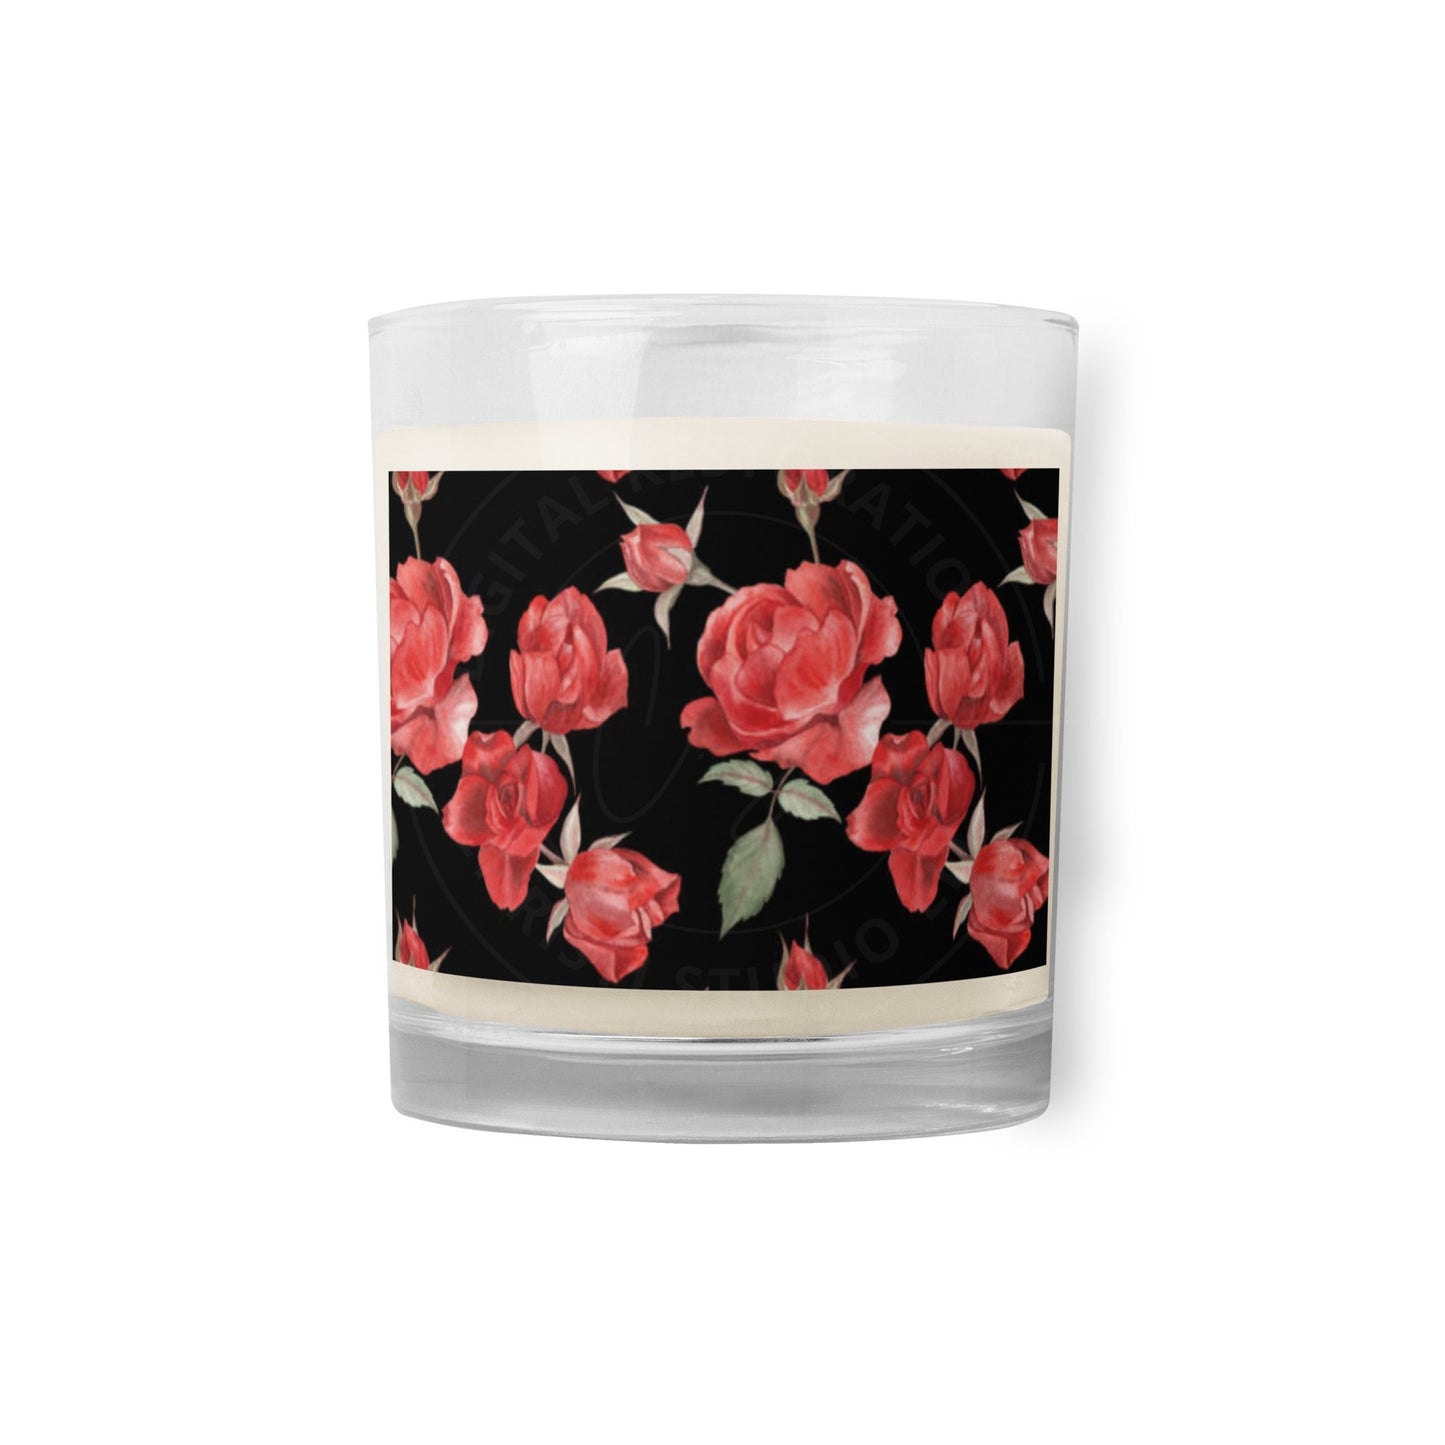 Glass Jar Soy Wax Floral Decorative Candle - #18 (Roses) - Christi Studio